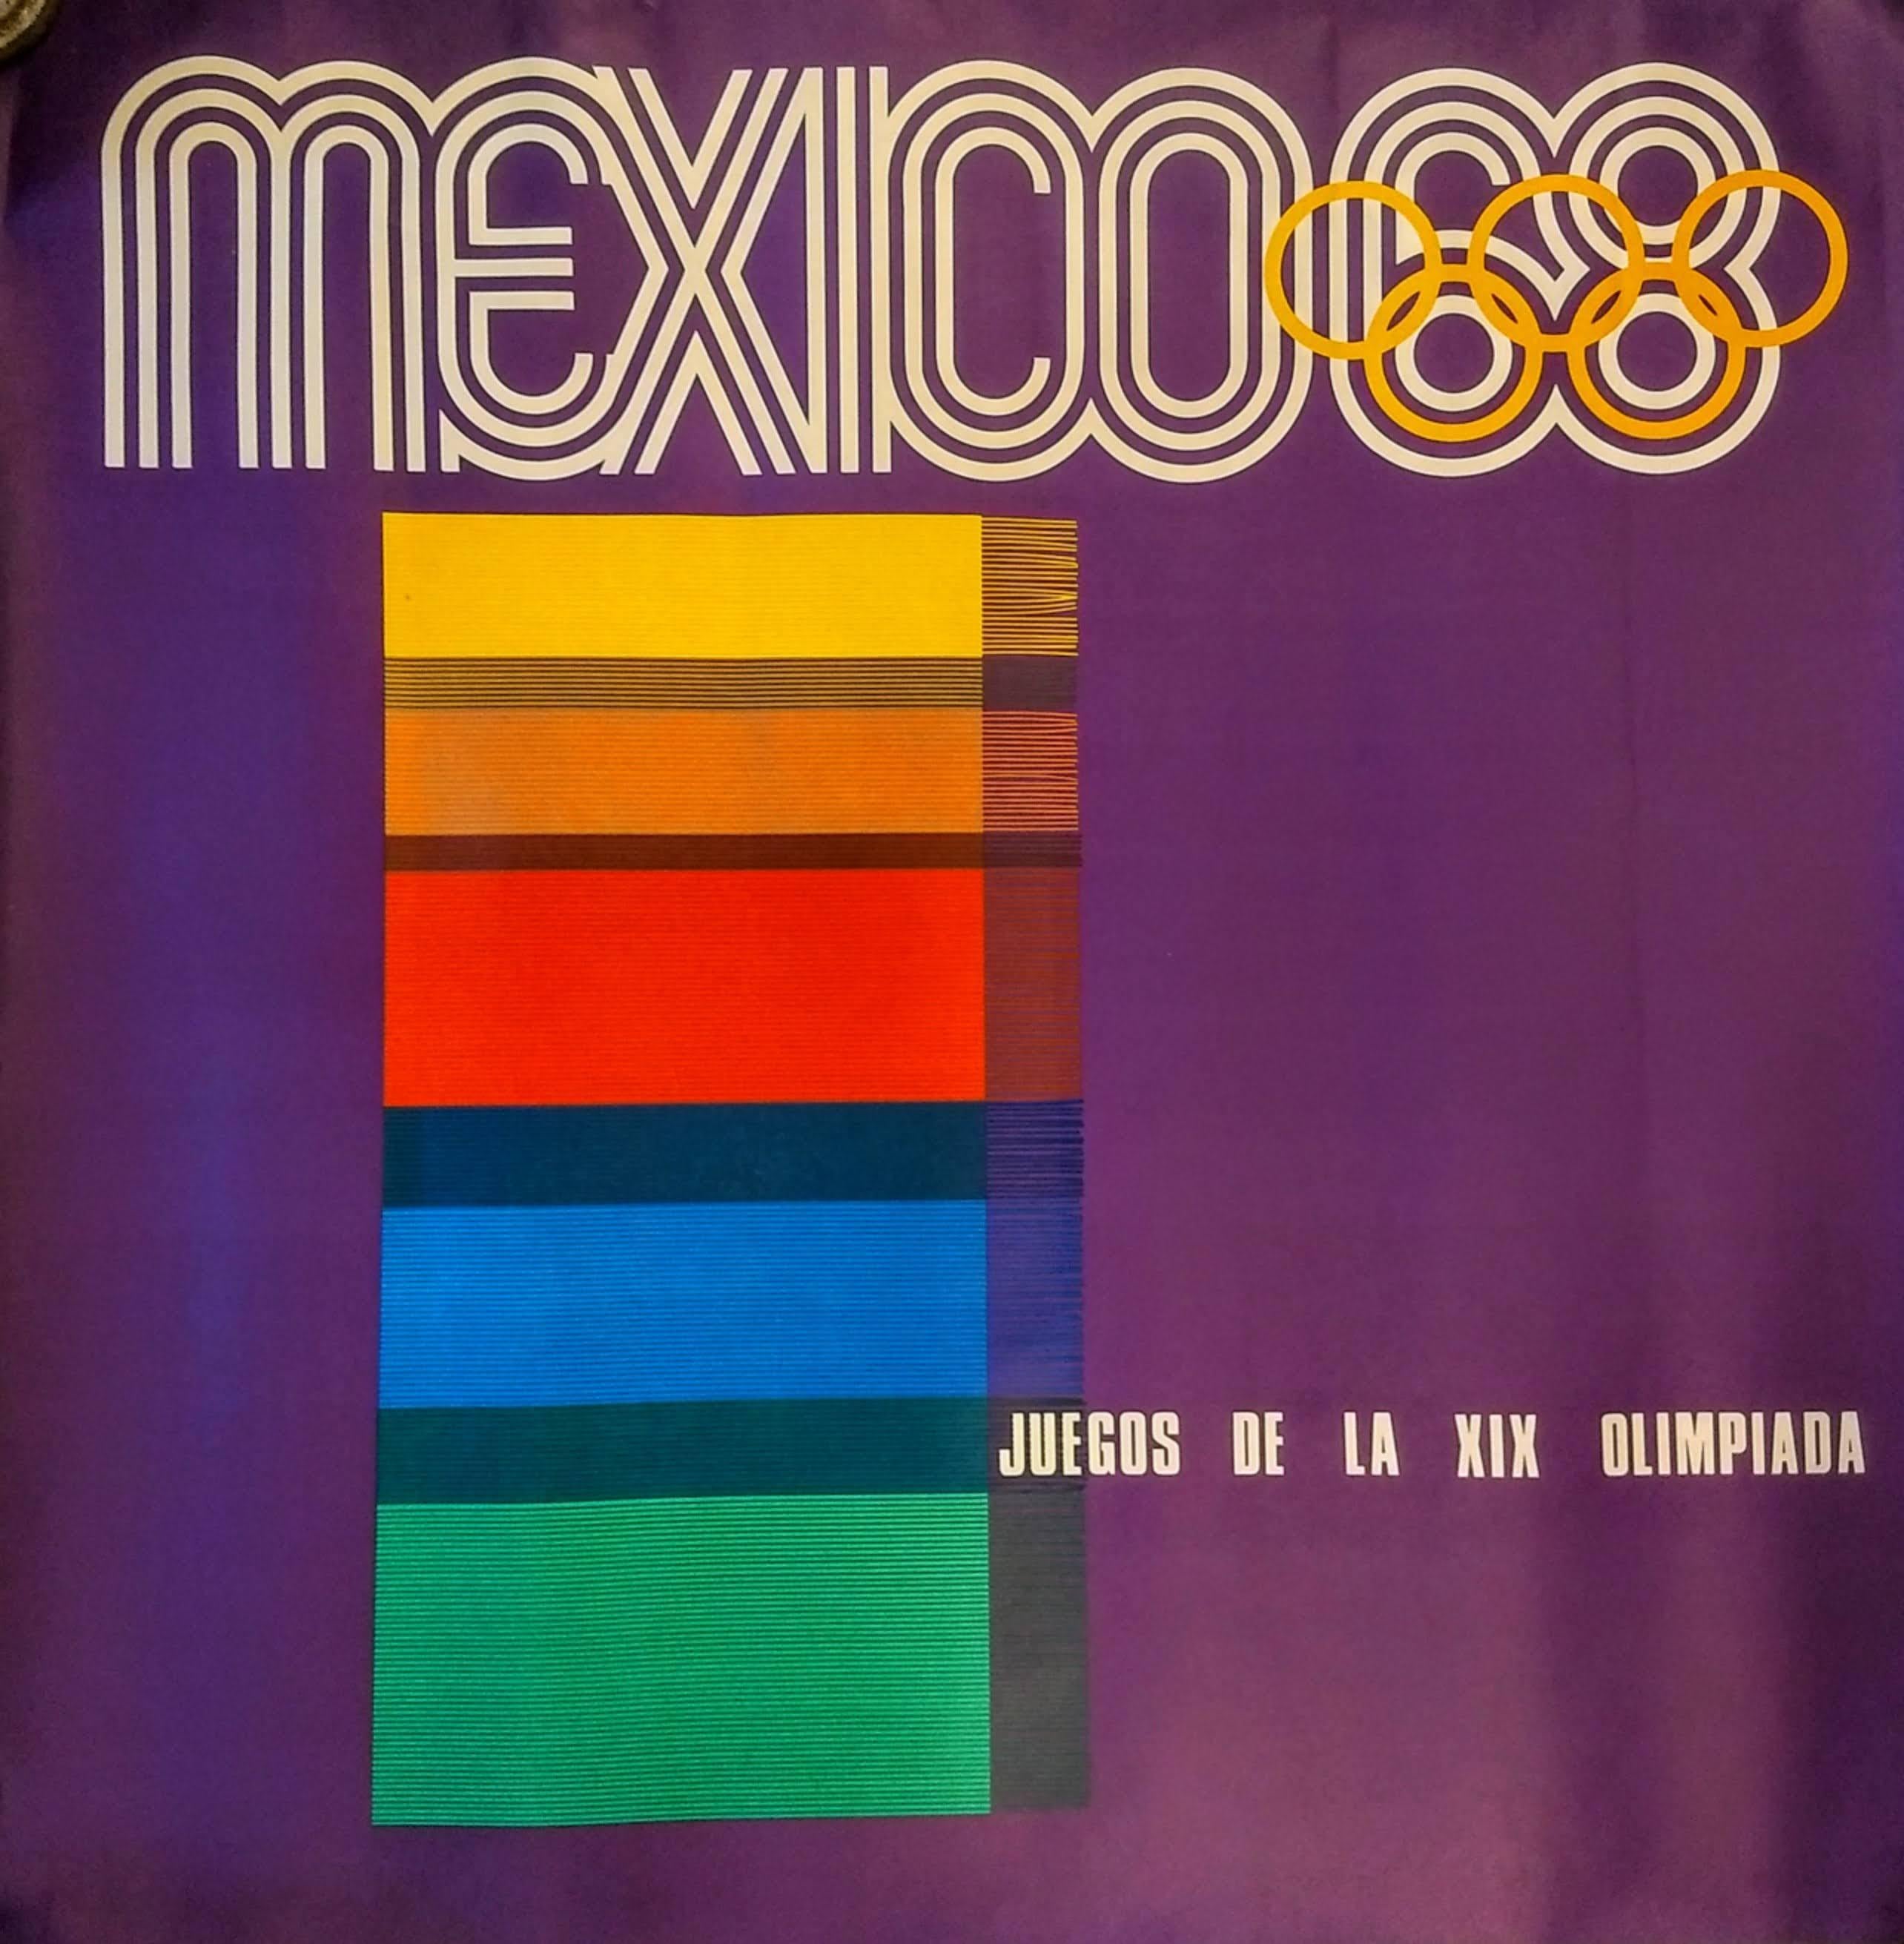 Mid-Century Modern Original Tourism Posters Promoting Mexico 68 Olympic Games Bursting with Colors For Sale